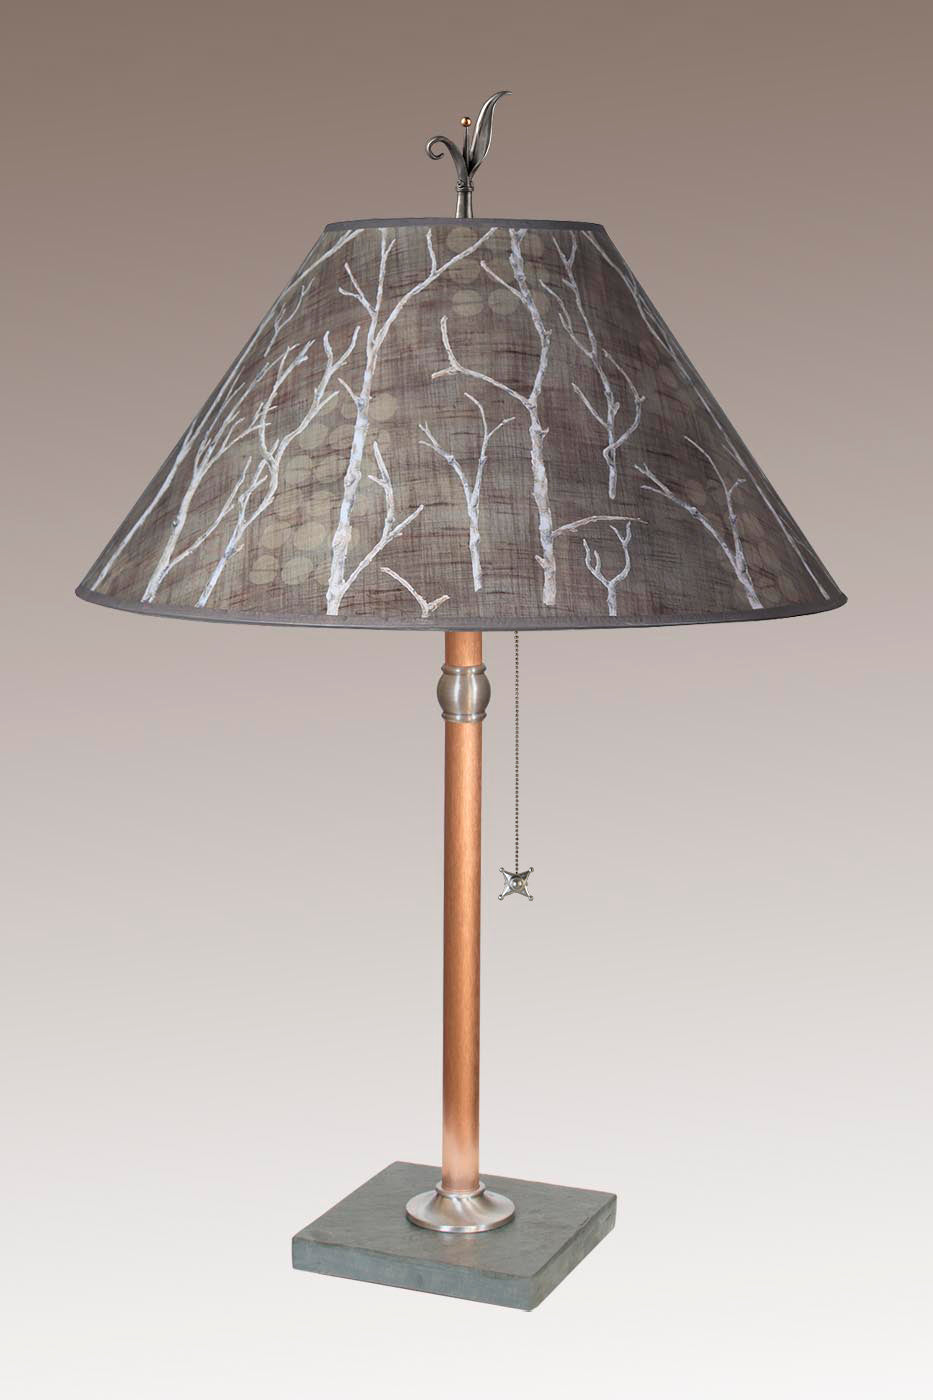 Janna Ugone &amp; Co Table Lamp Copper Table Lamp with Large Conical Shade in Twigs